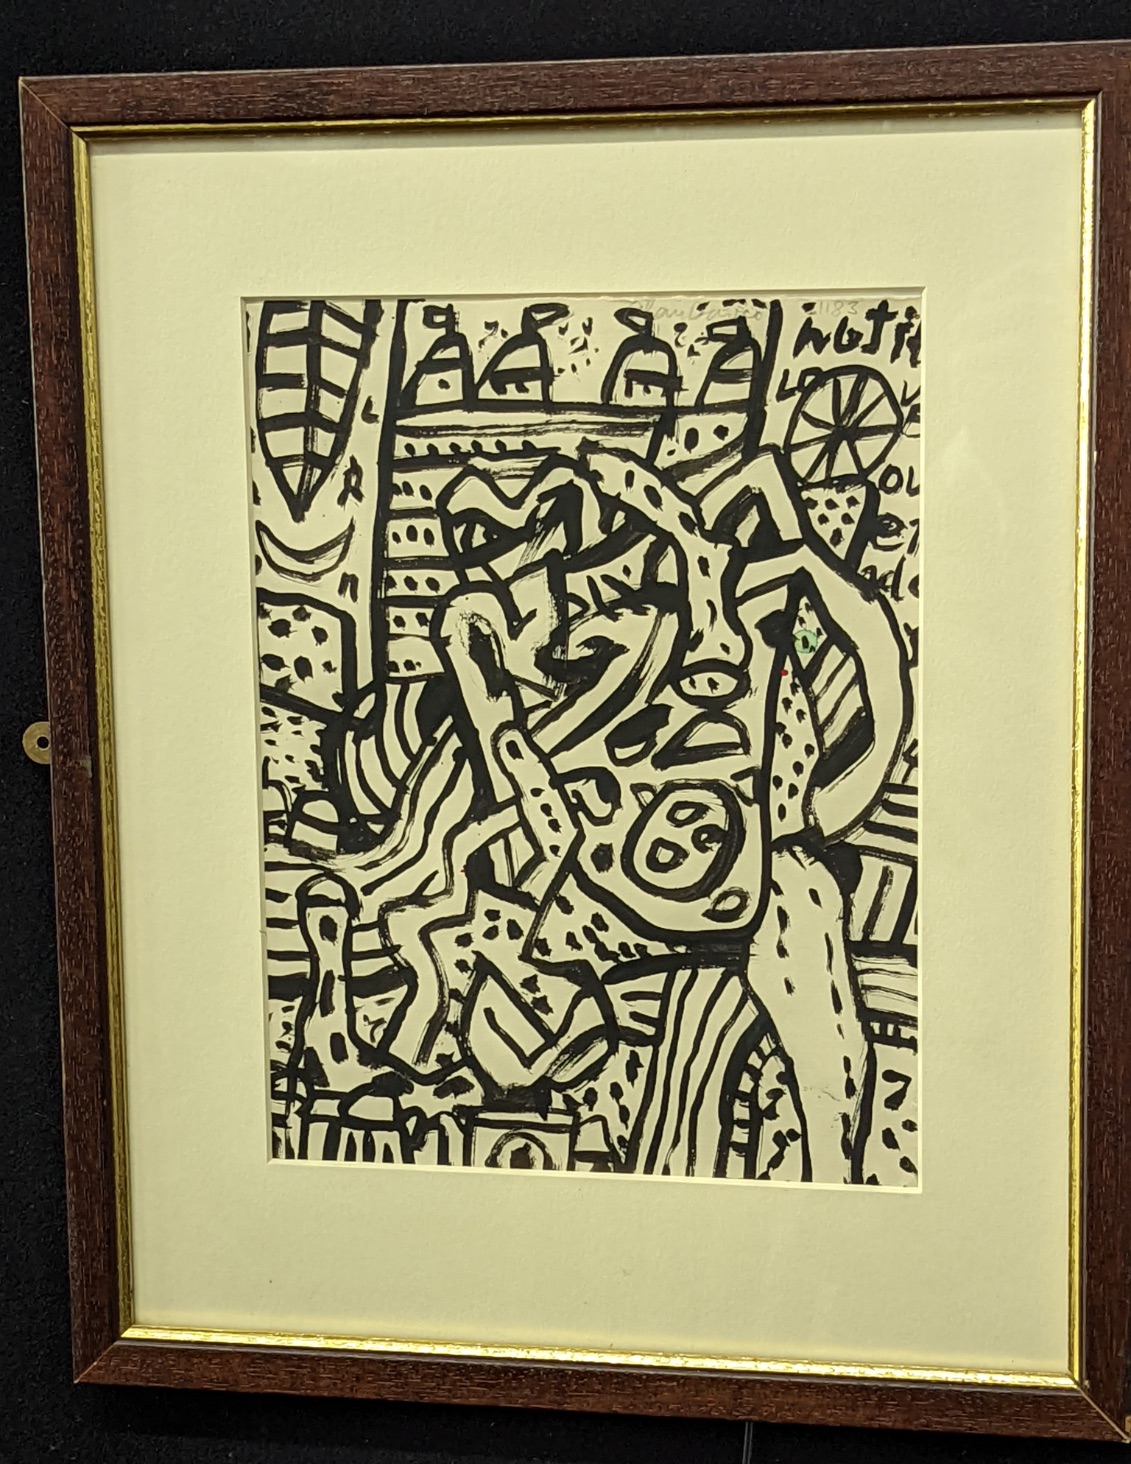 Alan Davie (1920-2014), Opus D.1183, 1983, brush and ink drawing, signed in pencil upper right, H. - Image 3 of 3